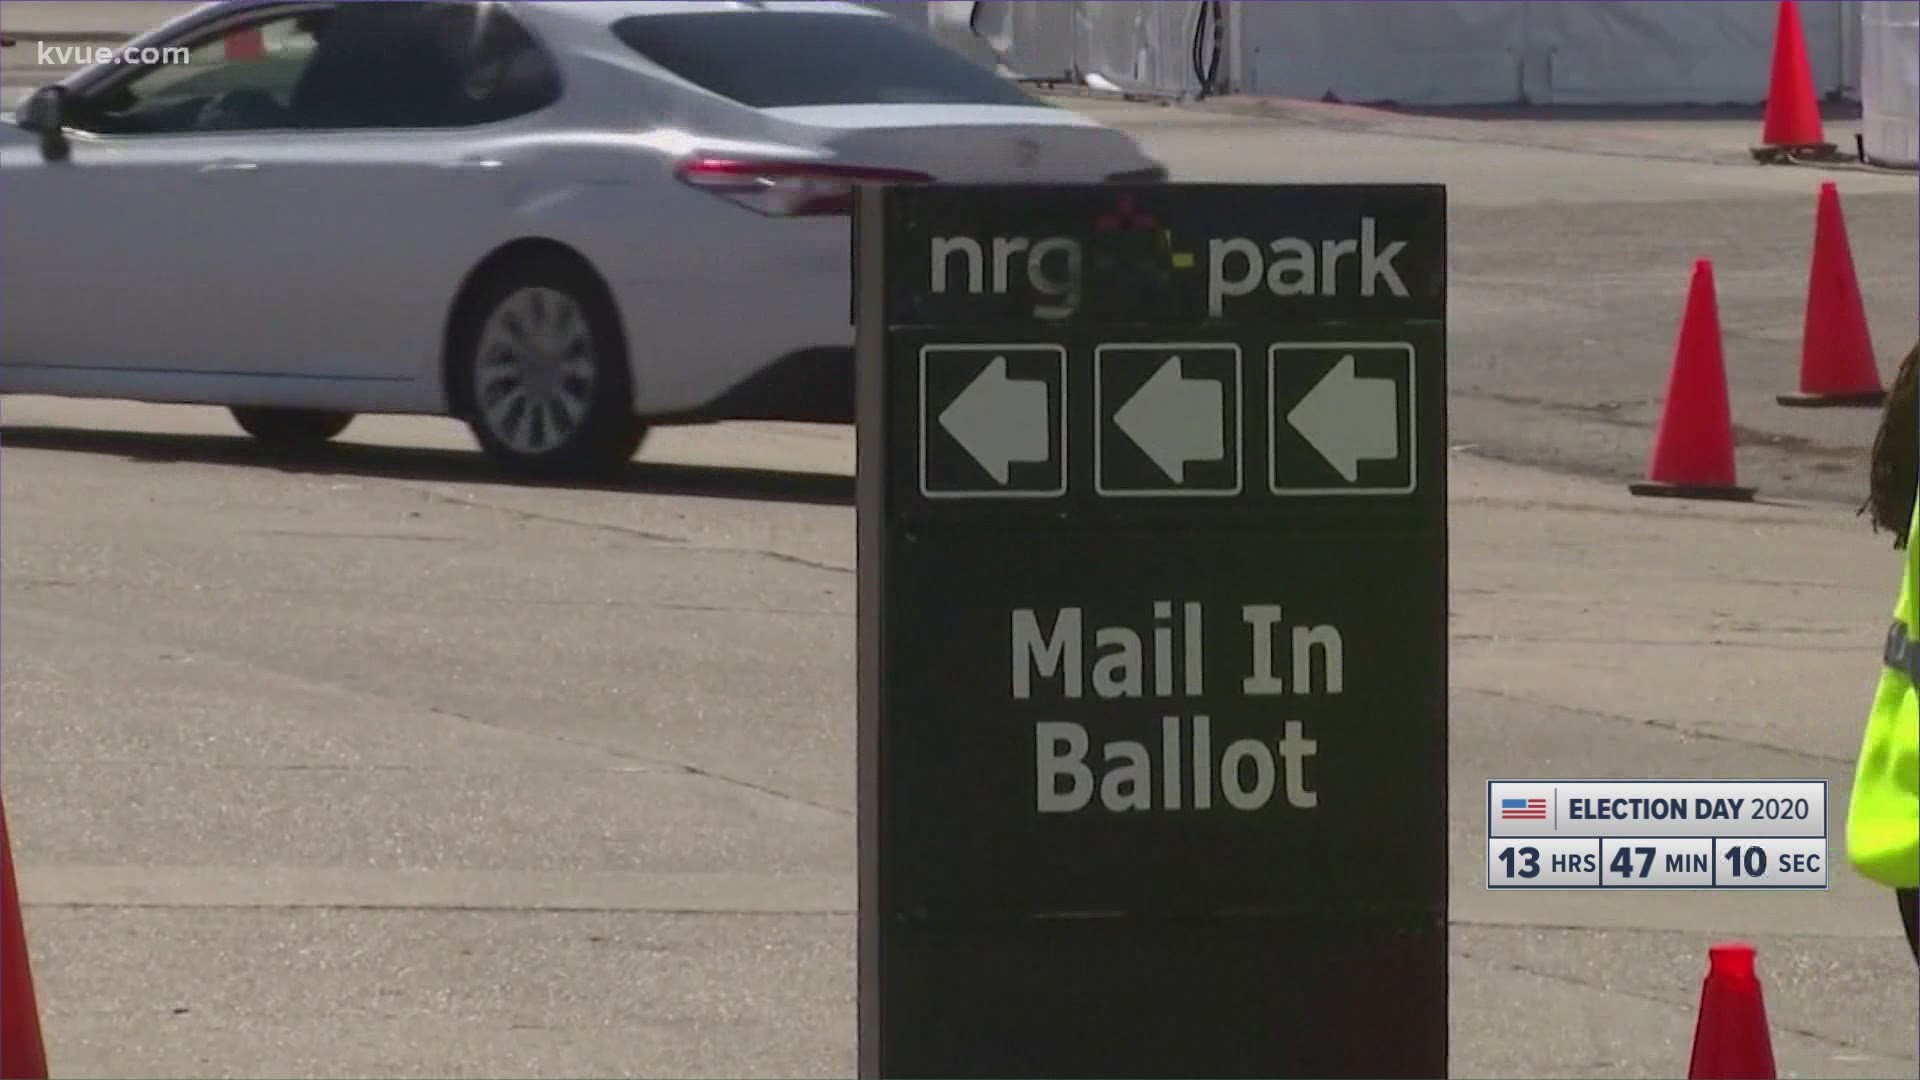 A federal judge rejected a request to throw out nearly 127,000 votes at a drive-thru polling place in Harris County.